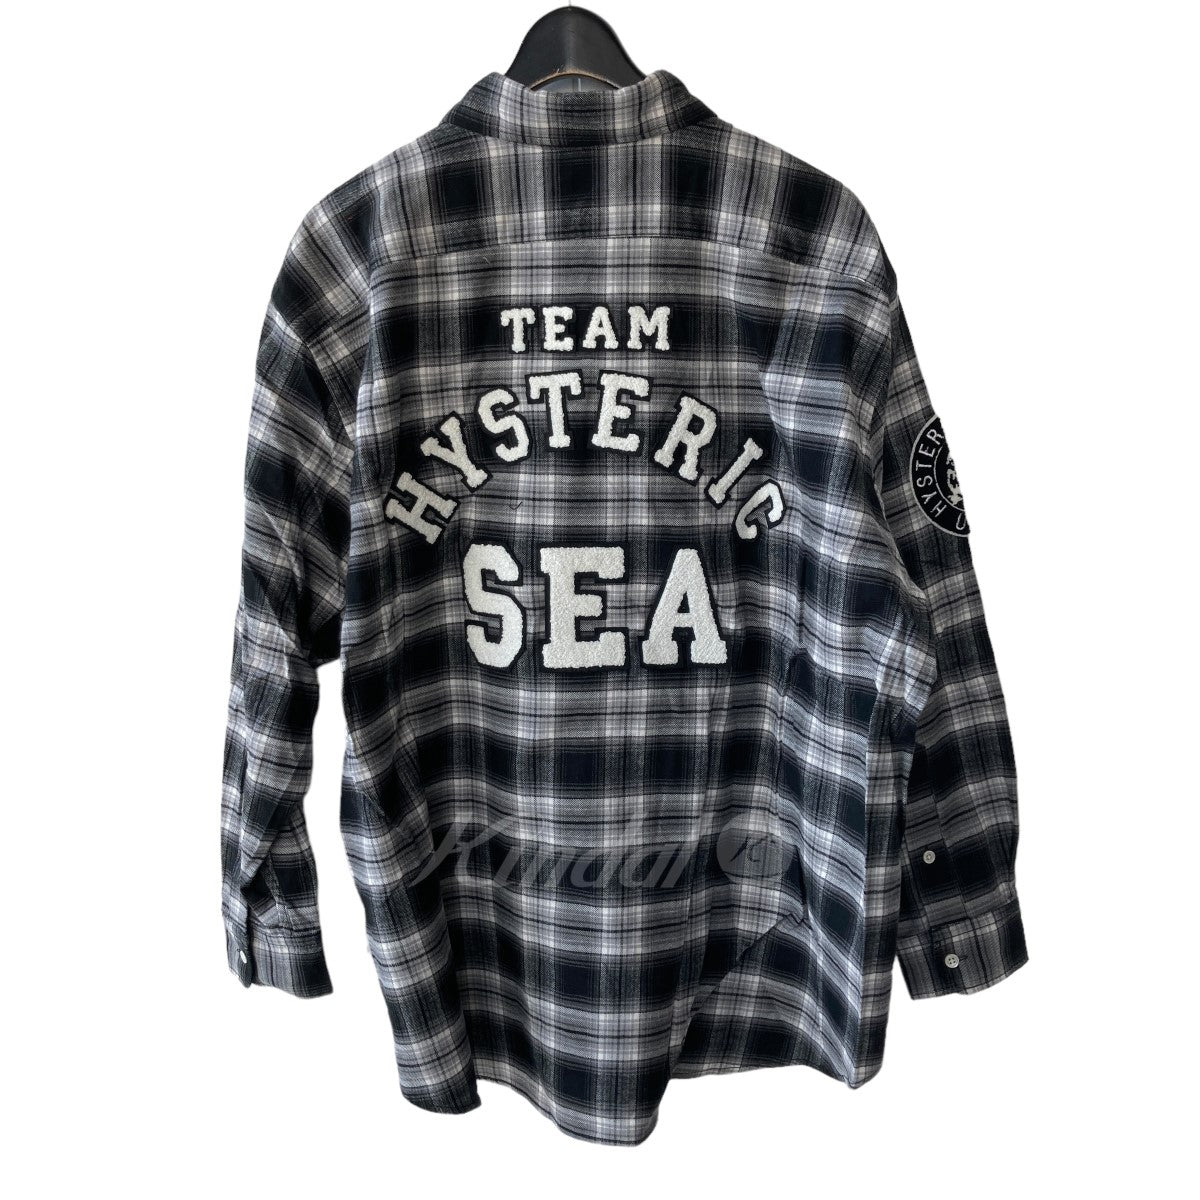 HYSTERIC GLAMOUR×WIND AND SEA(ウィンダンシー×ヒステリックグラマー) ロゴワッペンチェック長袖シャツ  wds-hys-3-04